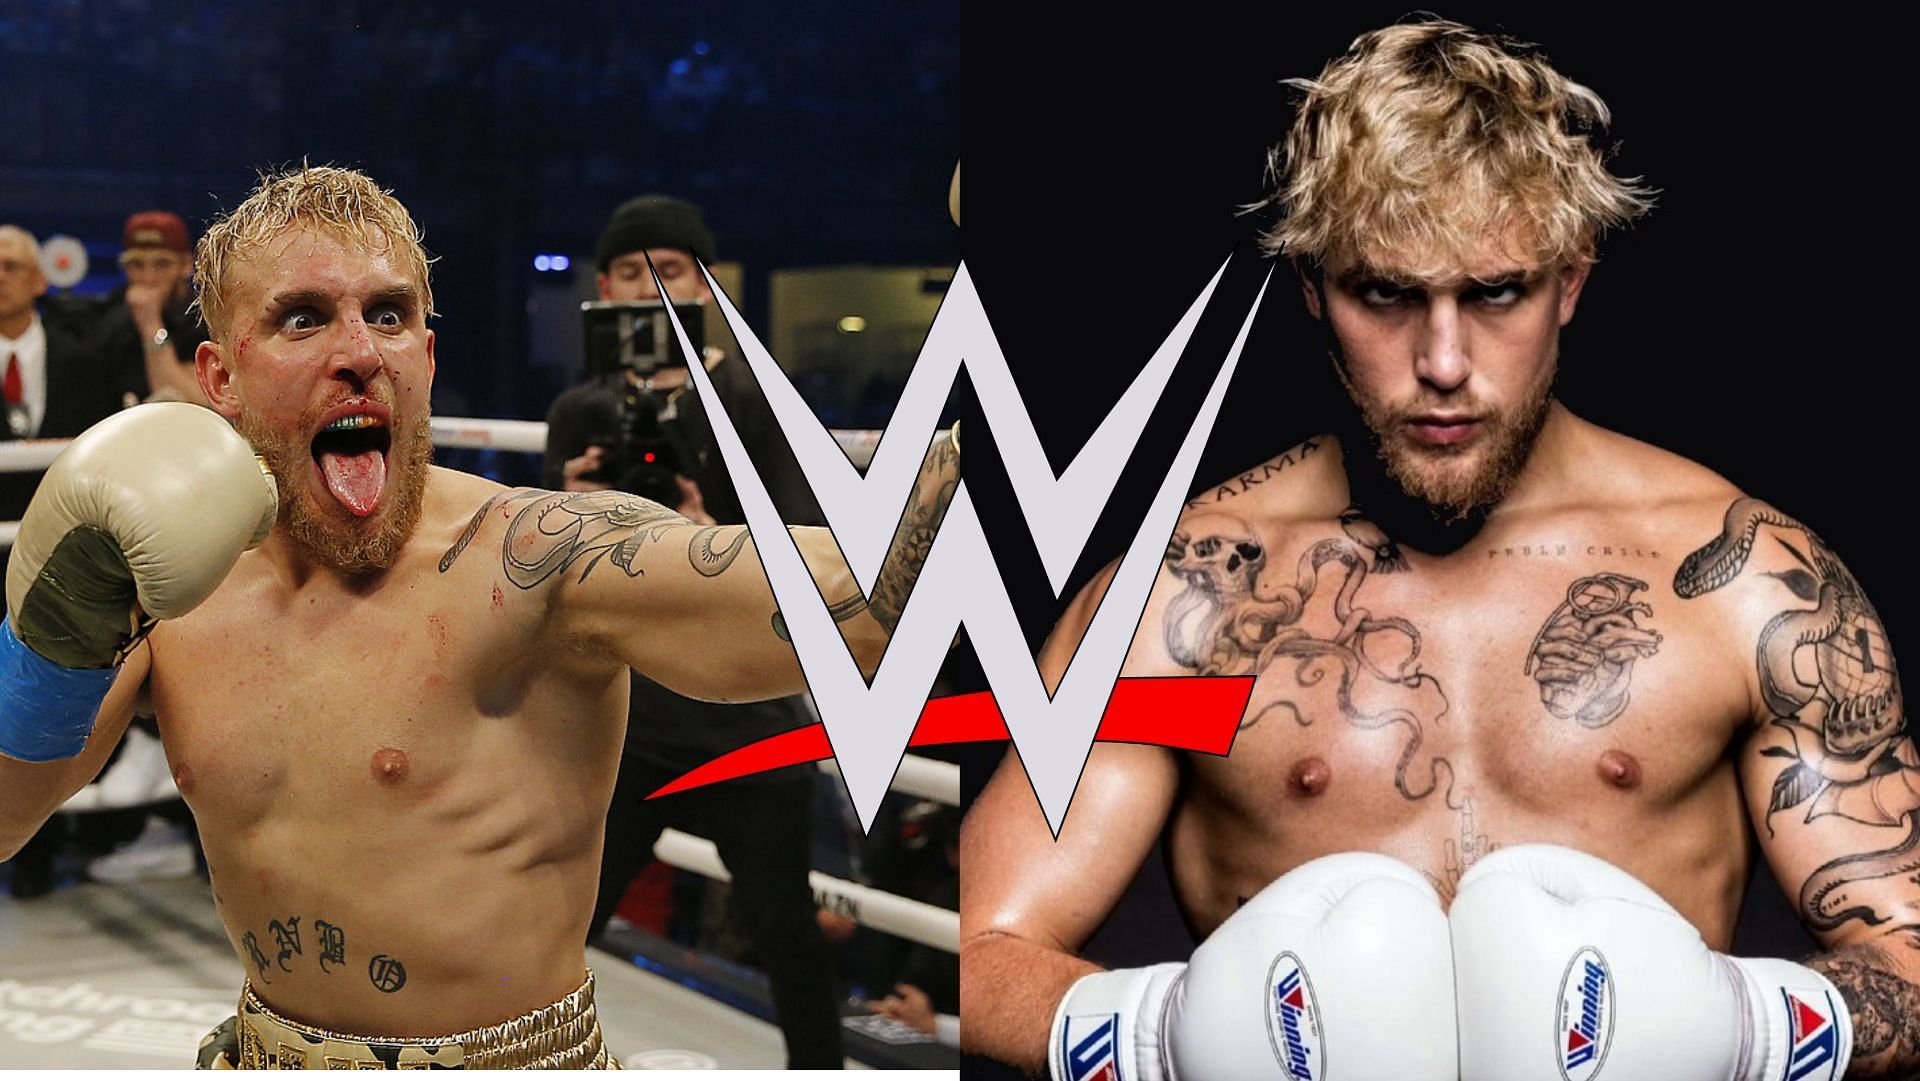 Who do you want to see Jake Paul wrestle against in WWE?